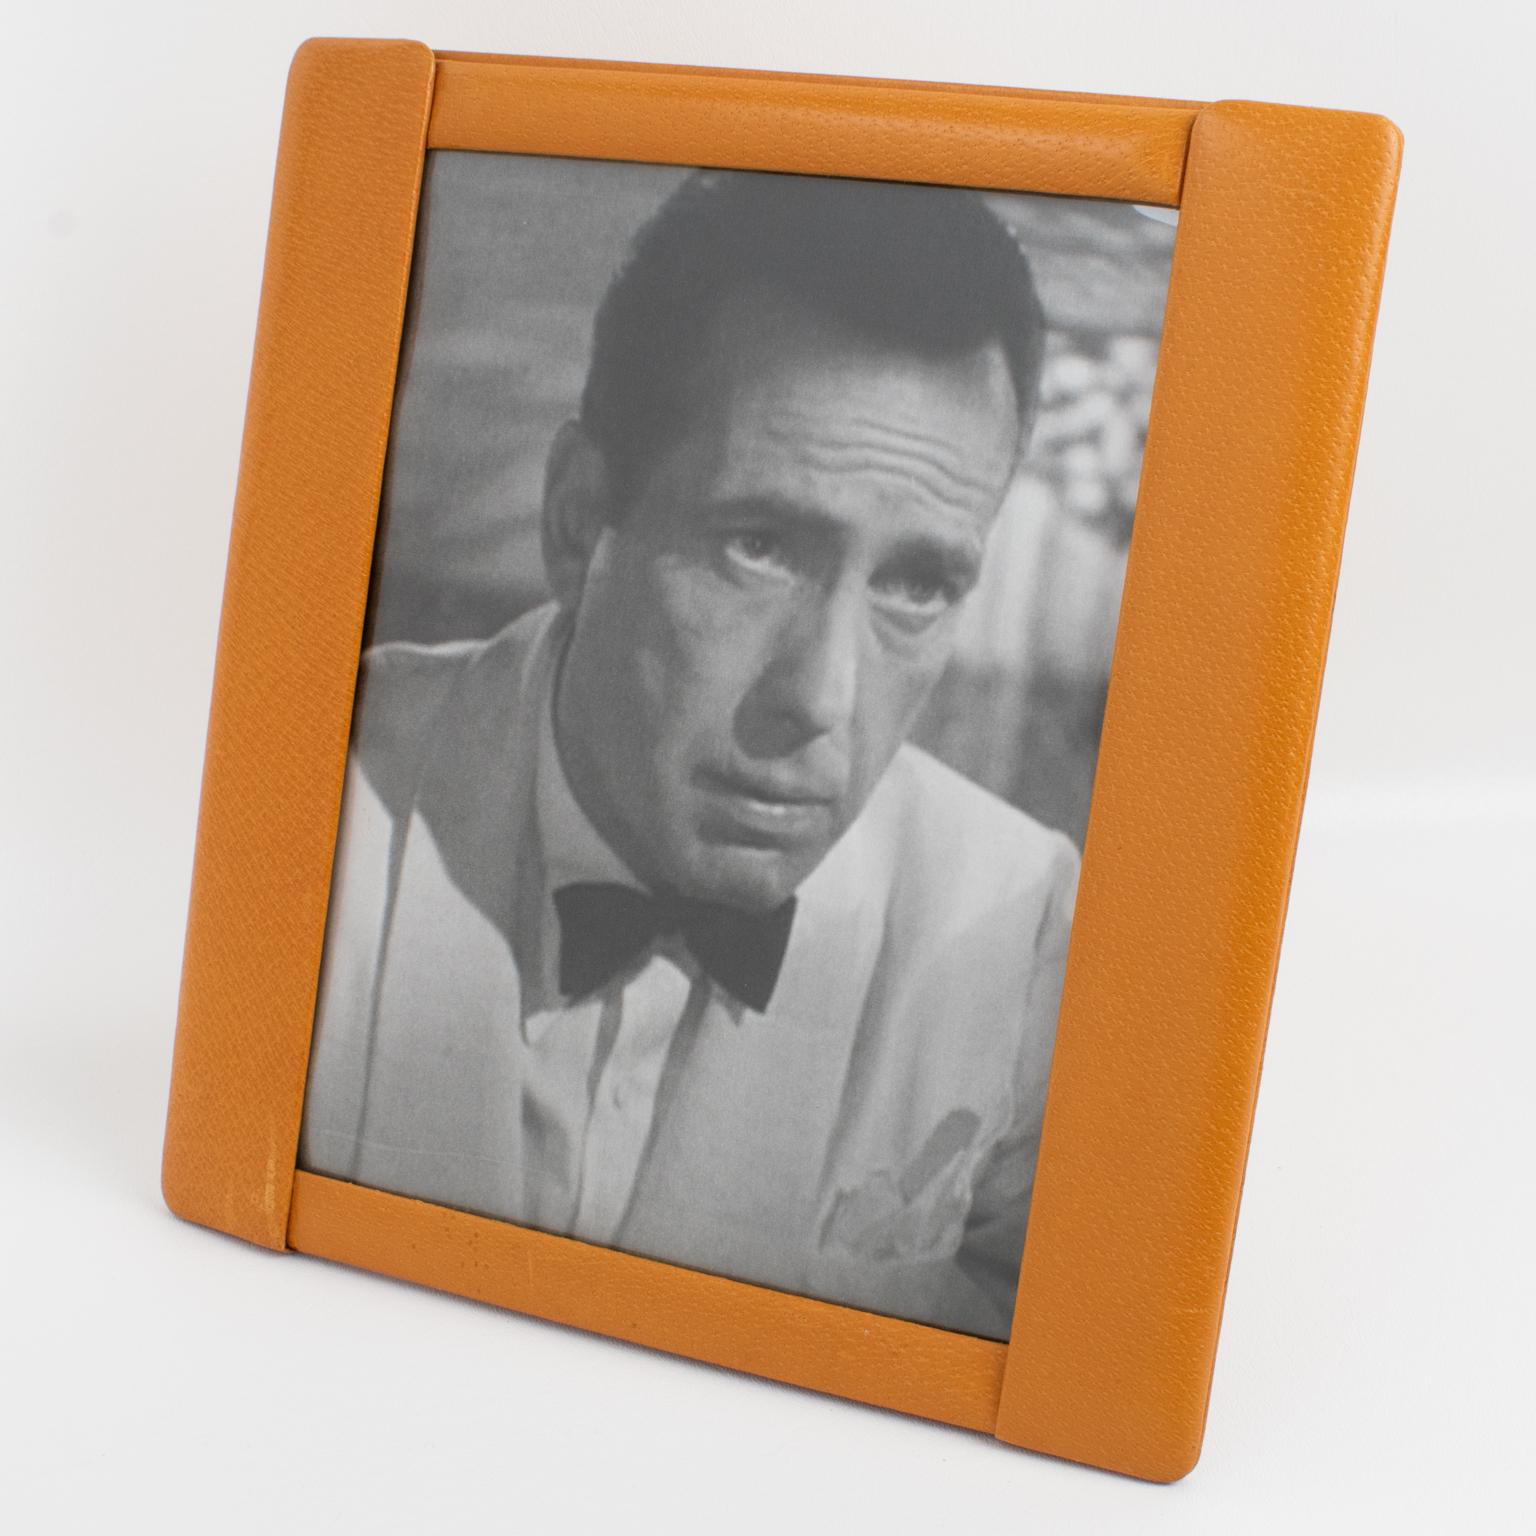 This stunning 1940s French Art Deco modernist leather picture photo frame features fine-grain calf leather in cognac color with a pattern. The easel and back are in the same calf leather, and a rhodoid protection is on the front to secure the